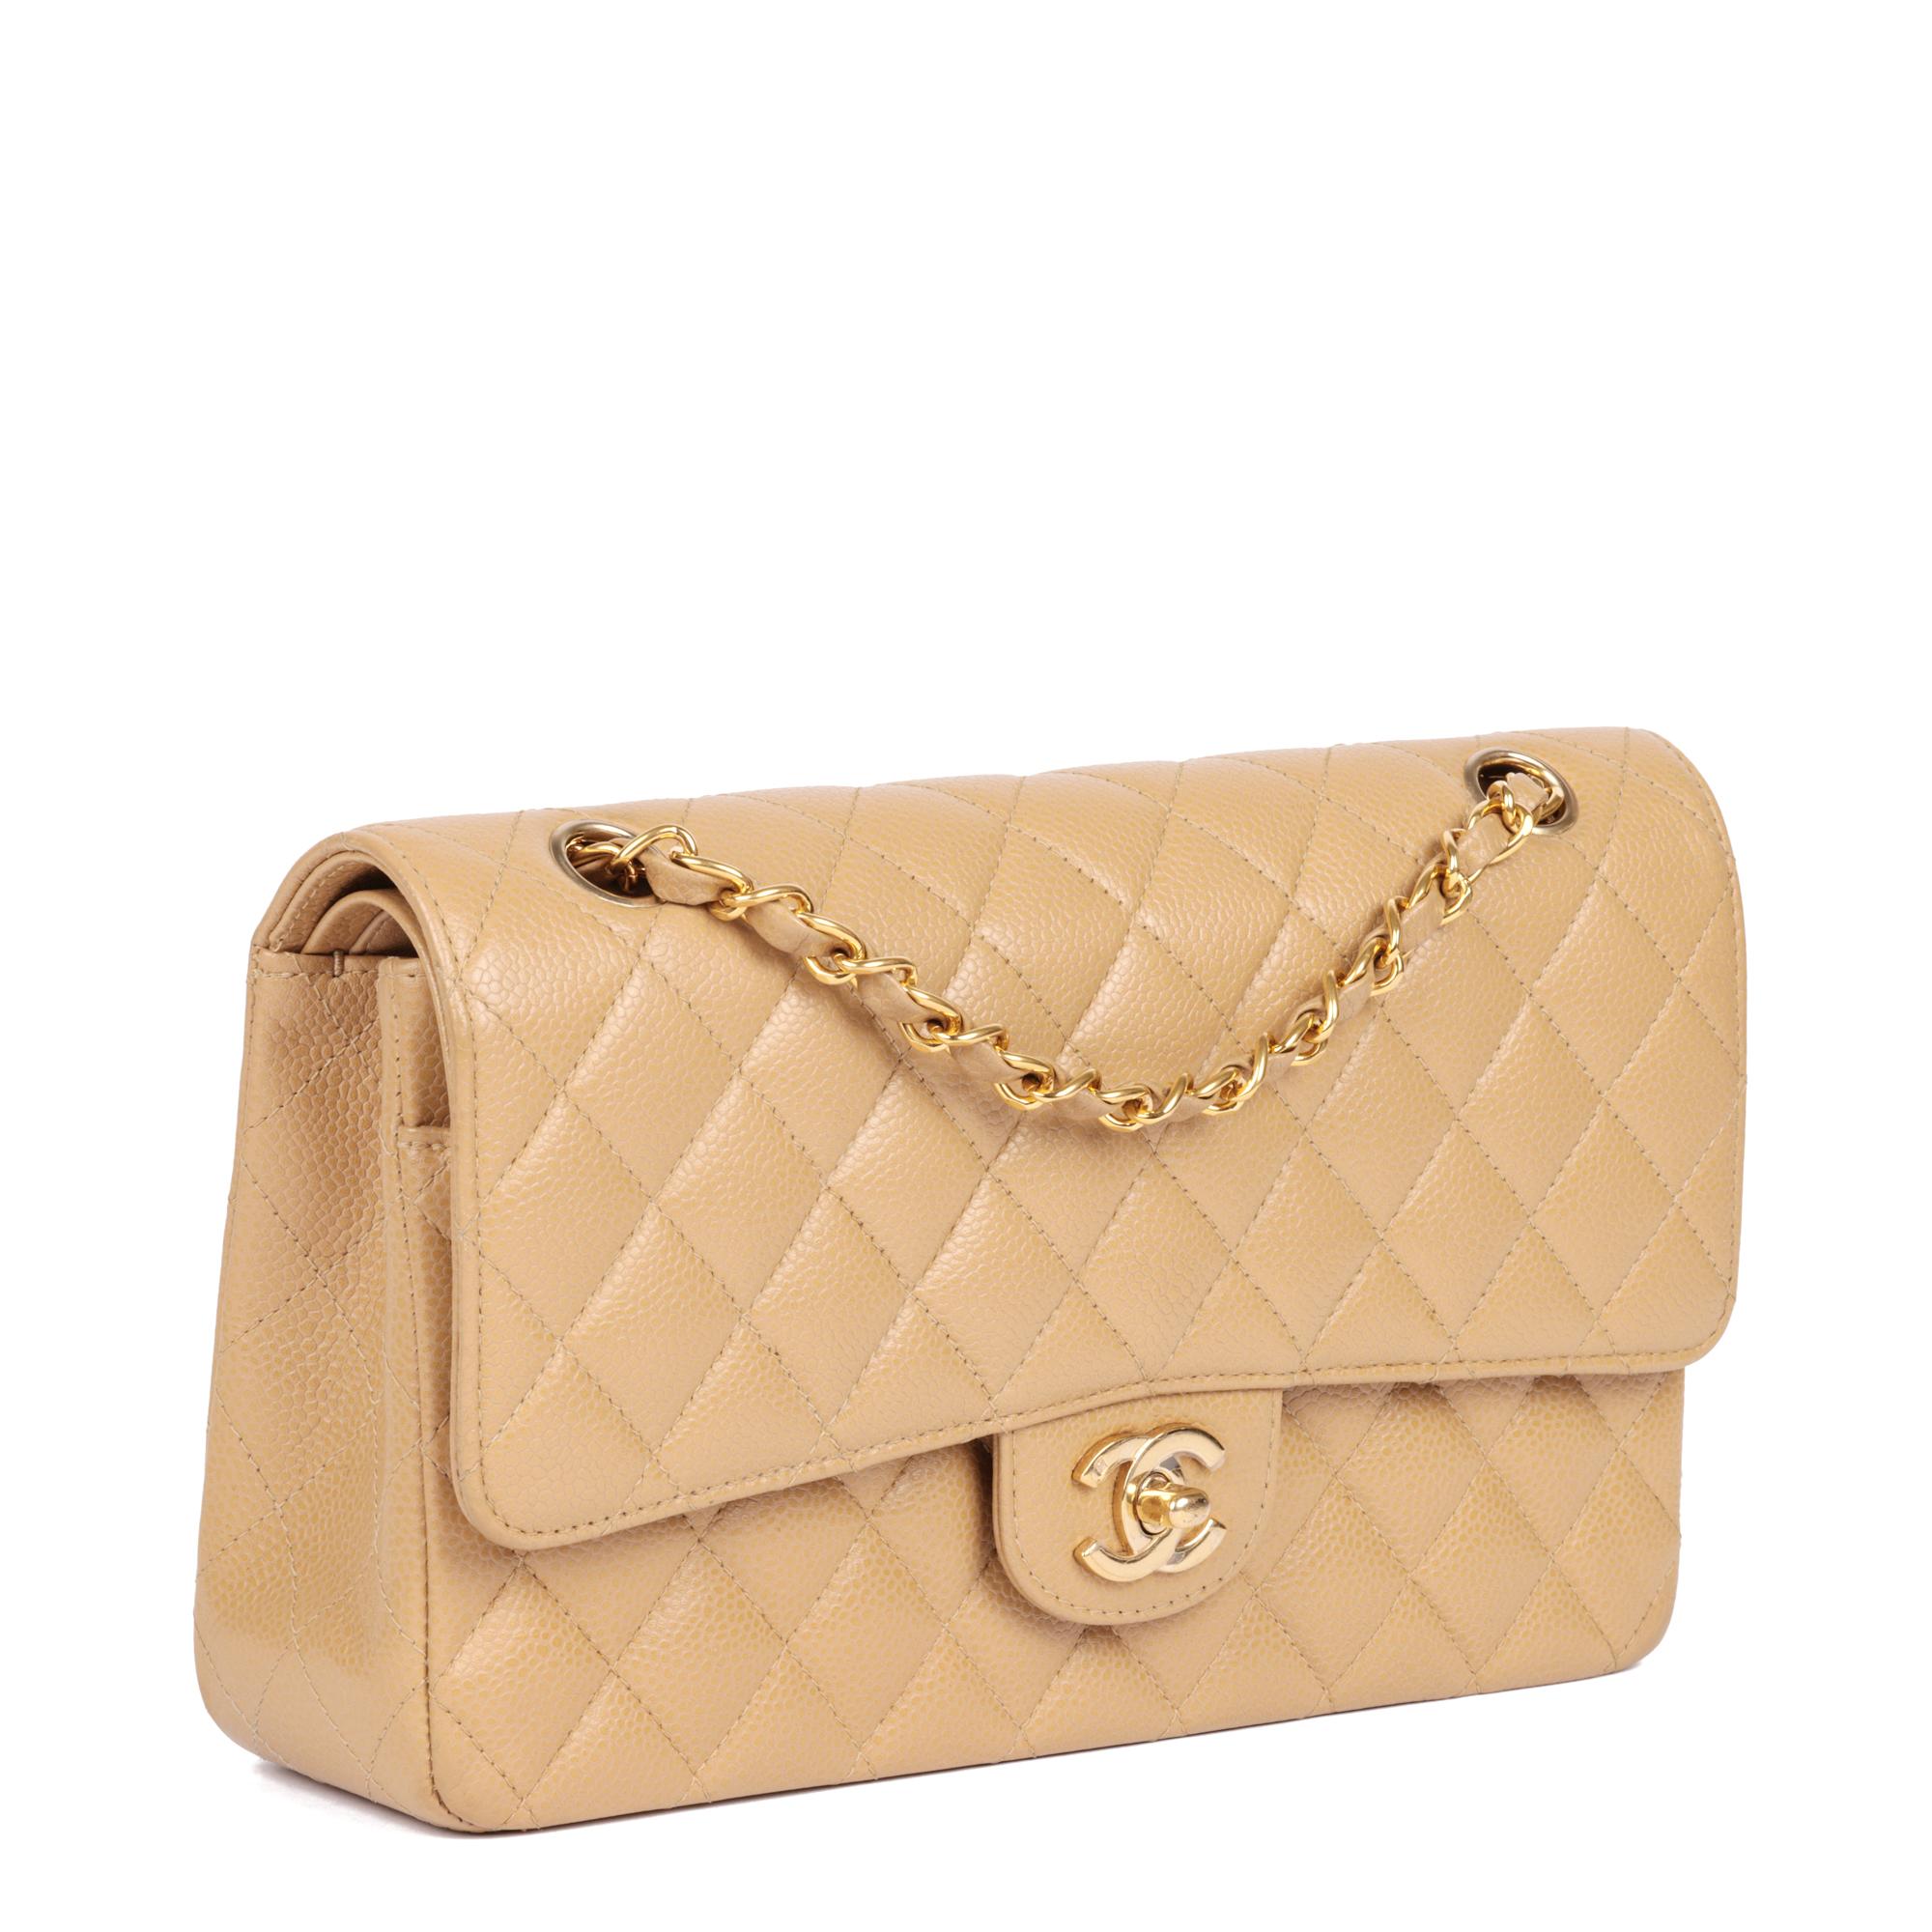 CHANEL
Beige Quilted Caviar Leather Medium Classic Double Flap Bag 

Xupes Reference: CB884
Serial Number: 9199819
Age (Circa): 2004
Accompanied By: Chanel Dust Bag, Box
Authenticity Details: Serial Sticker (Made in France)
Gender: Ladies
Type: